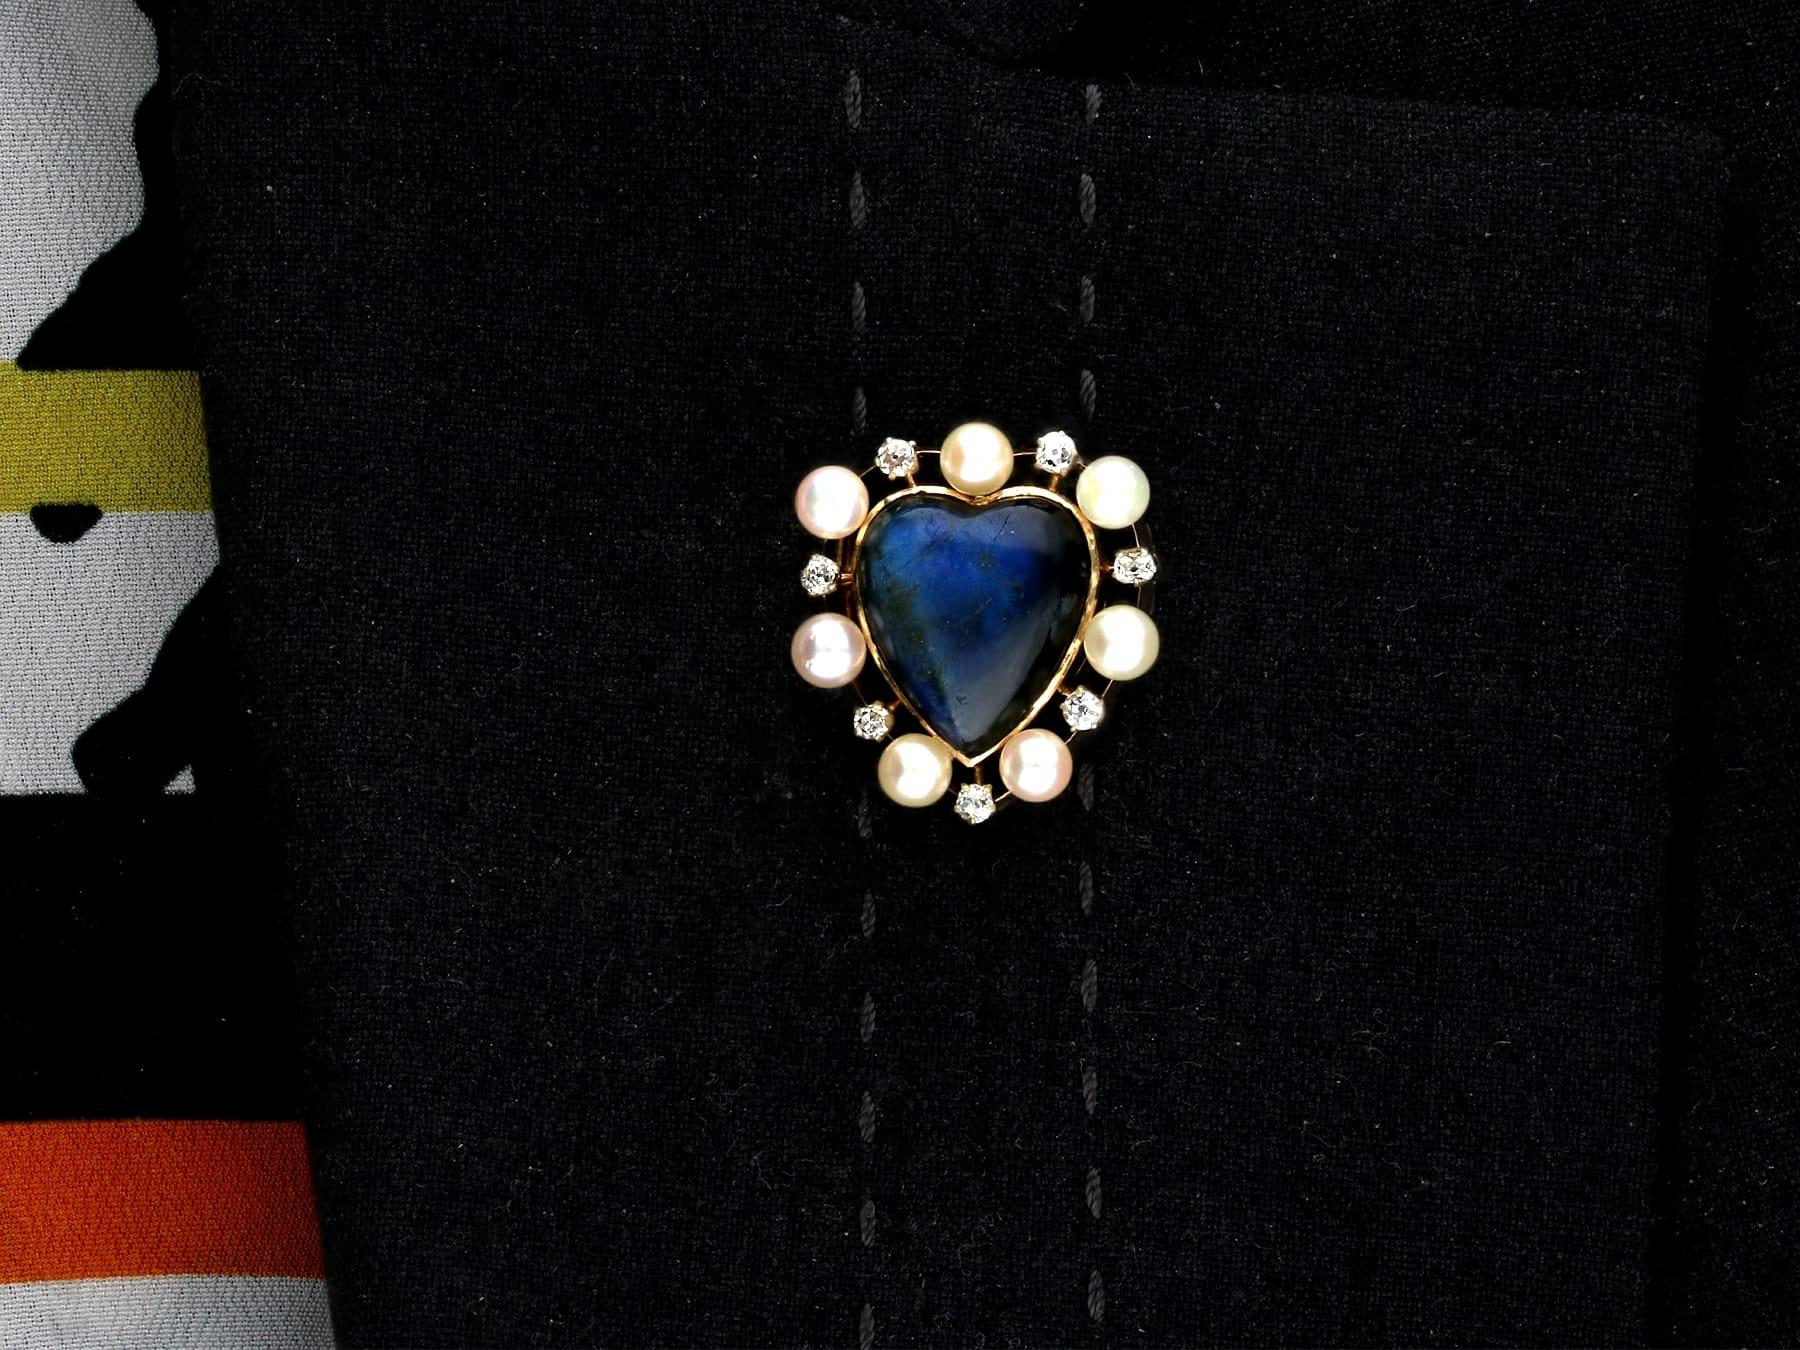 Antique 3.98Ct Cabochon Cut Labradorite and Seed Pearl Diamond and Gold Brooch For Sale 2